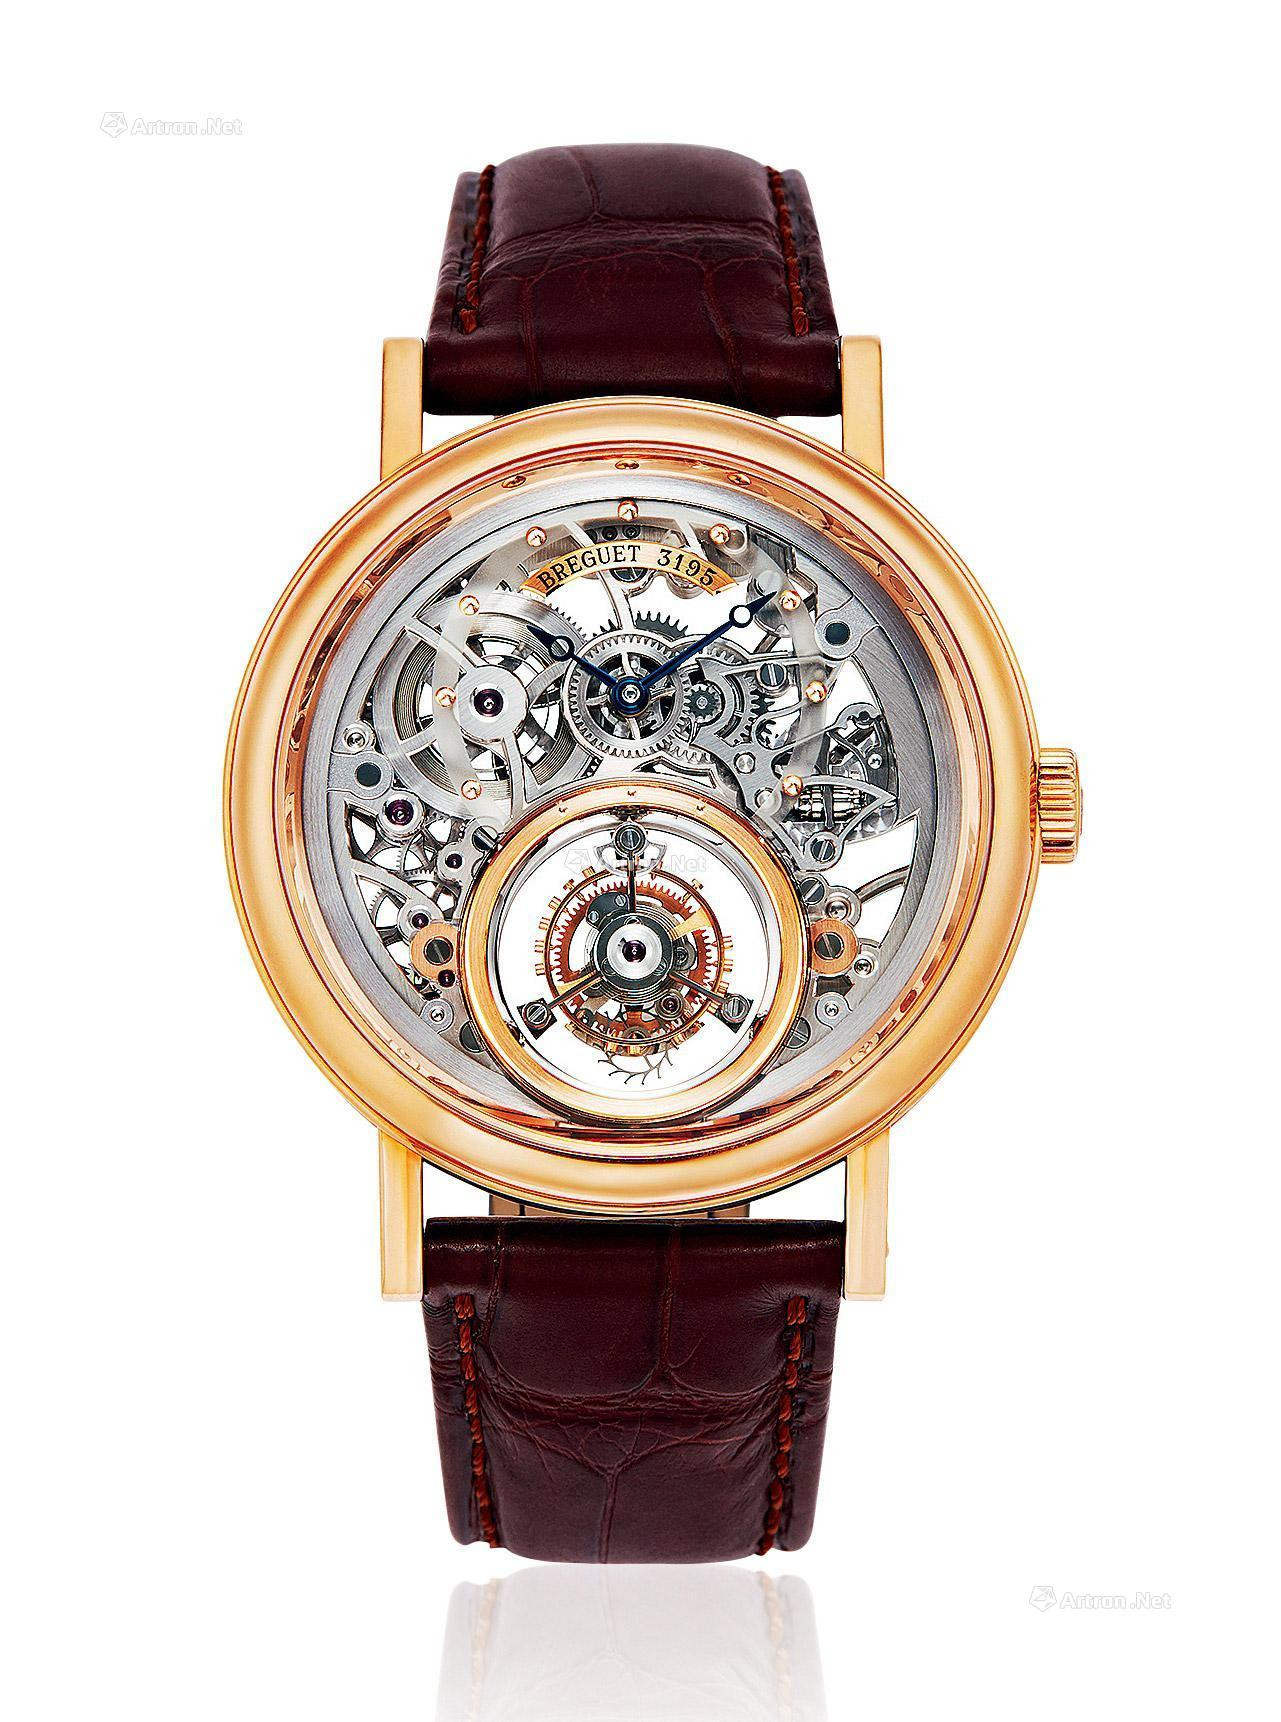 BREGUET A ROSE GOLD TOURBILLON MANUALLY-WOUND WRISTWATCH WITH SKELETONISED DIAL